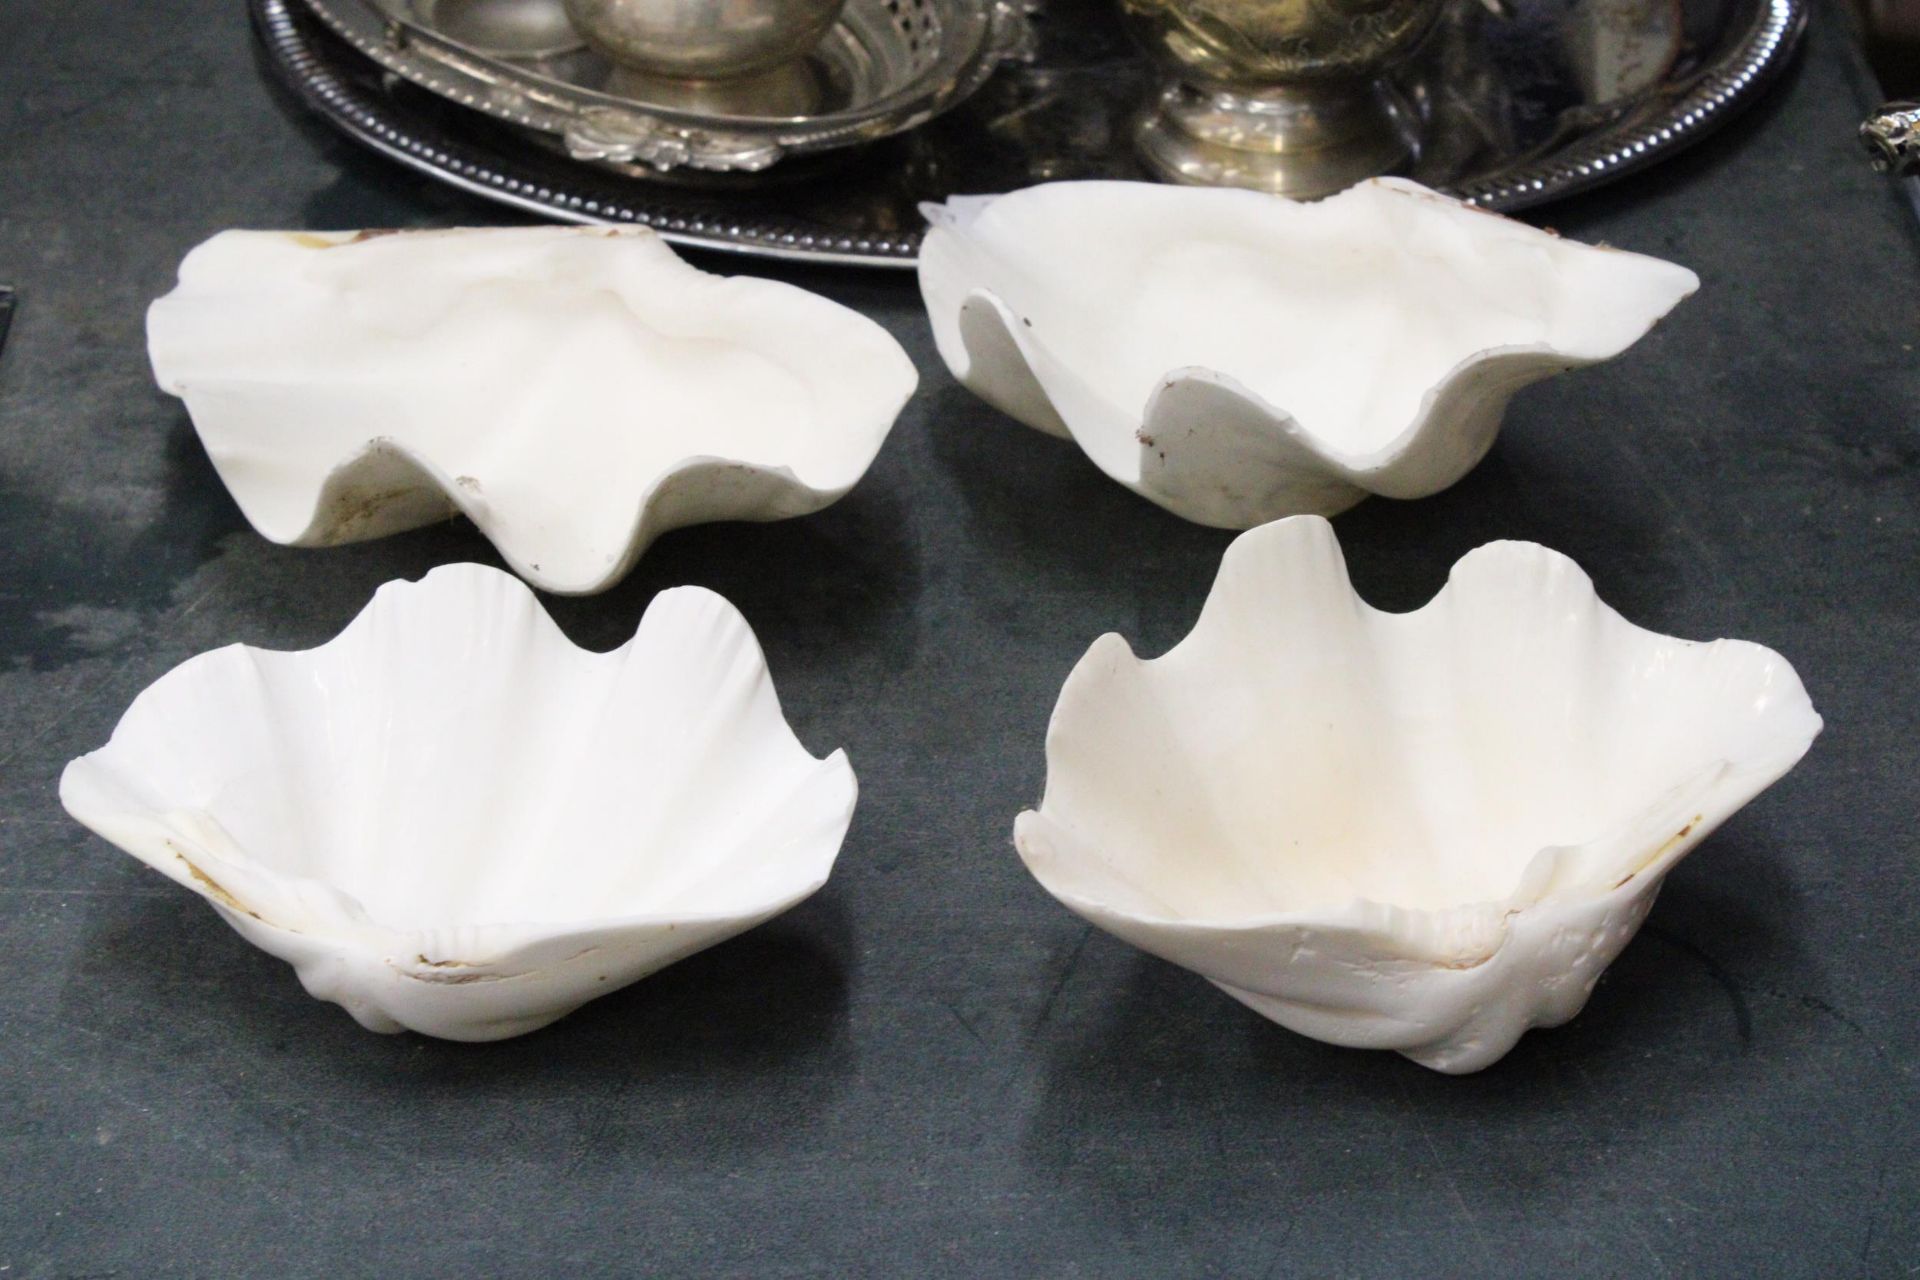 FOUR CERAMIC CLAM SHELL DISHES